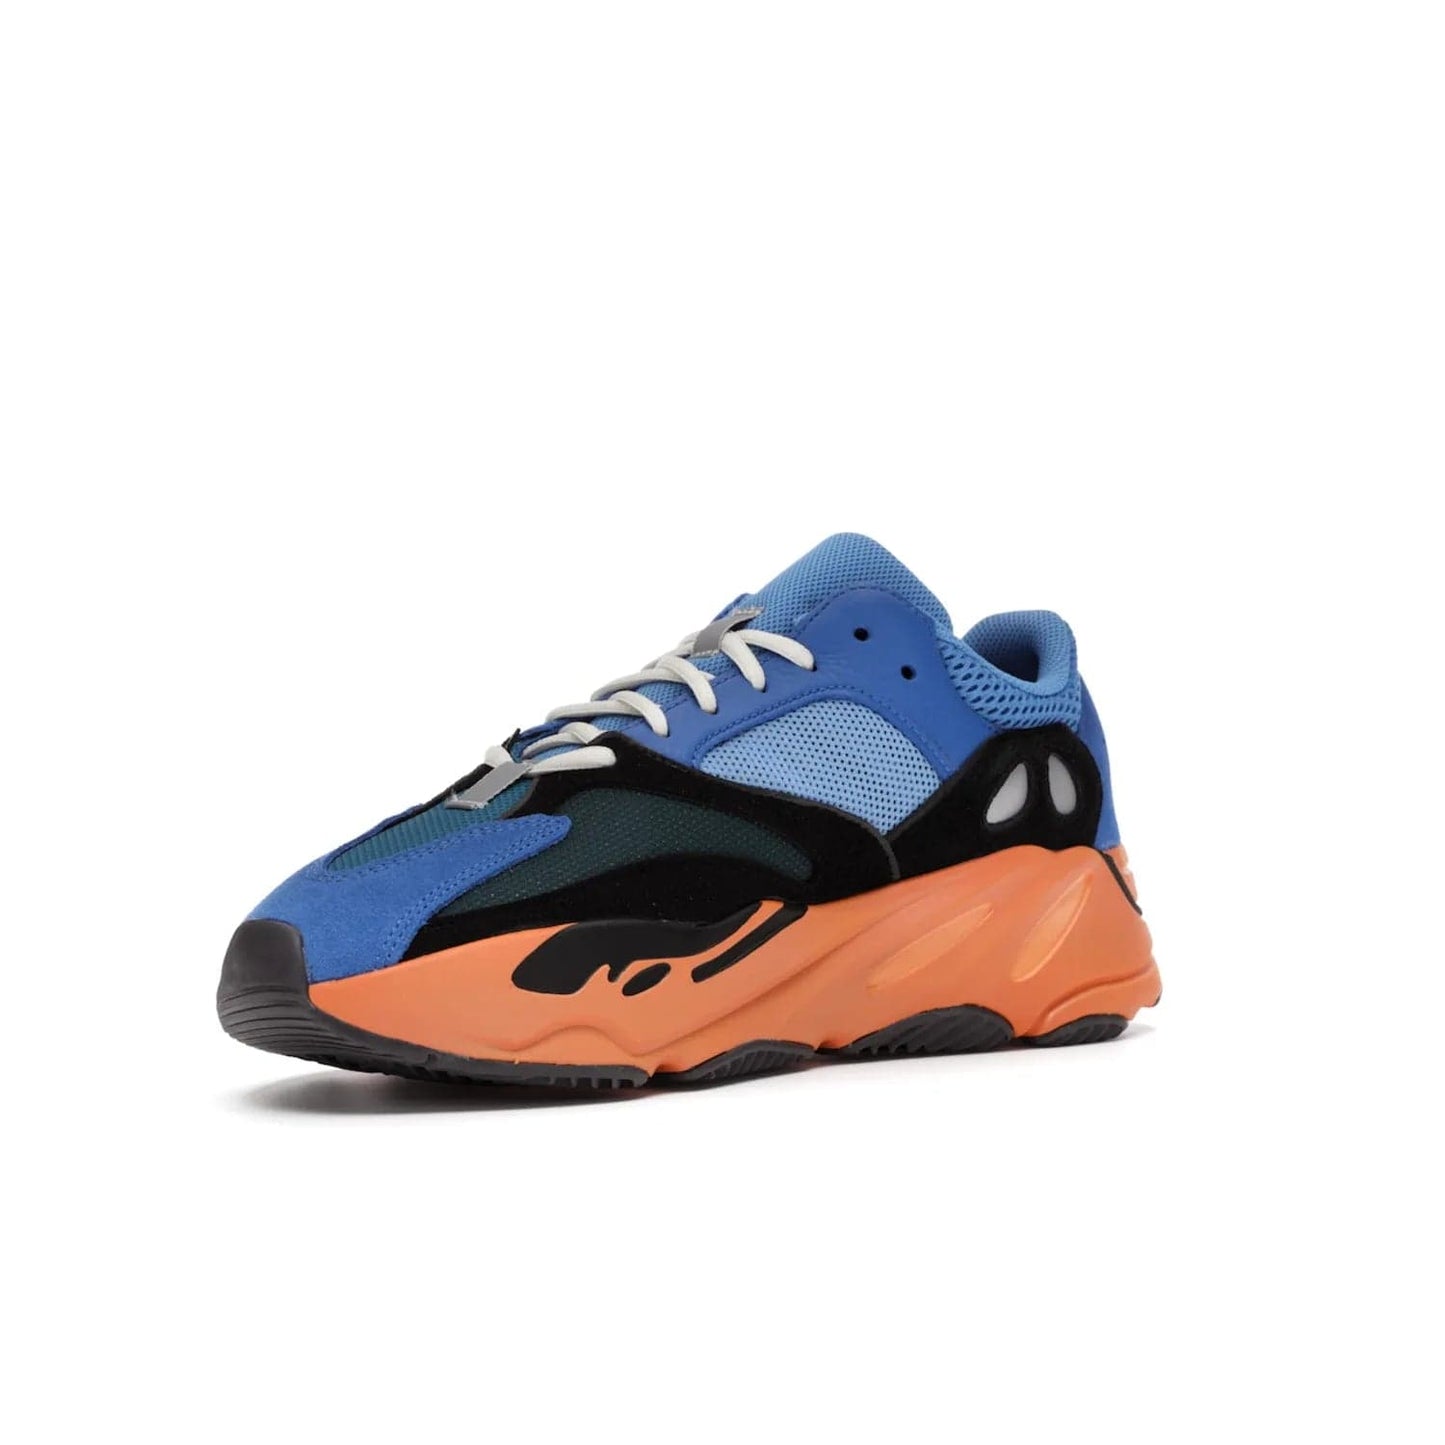 adidas Yeezy Boost 700 Bright Blue - Image 15 - Only at www.BallersClubKickz.com - Iconic sneaker style meets vibrant colour with the adidas Yeezy Boost 700 Bright Blue. Reflective accents, turquoise and teal panels, bright orange midsole and black outsole make for a bold release. April 2021.